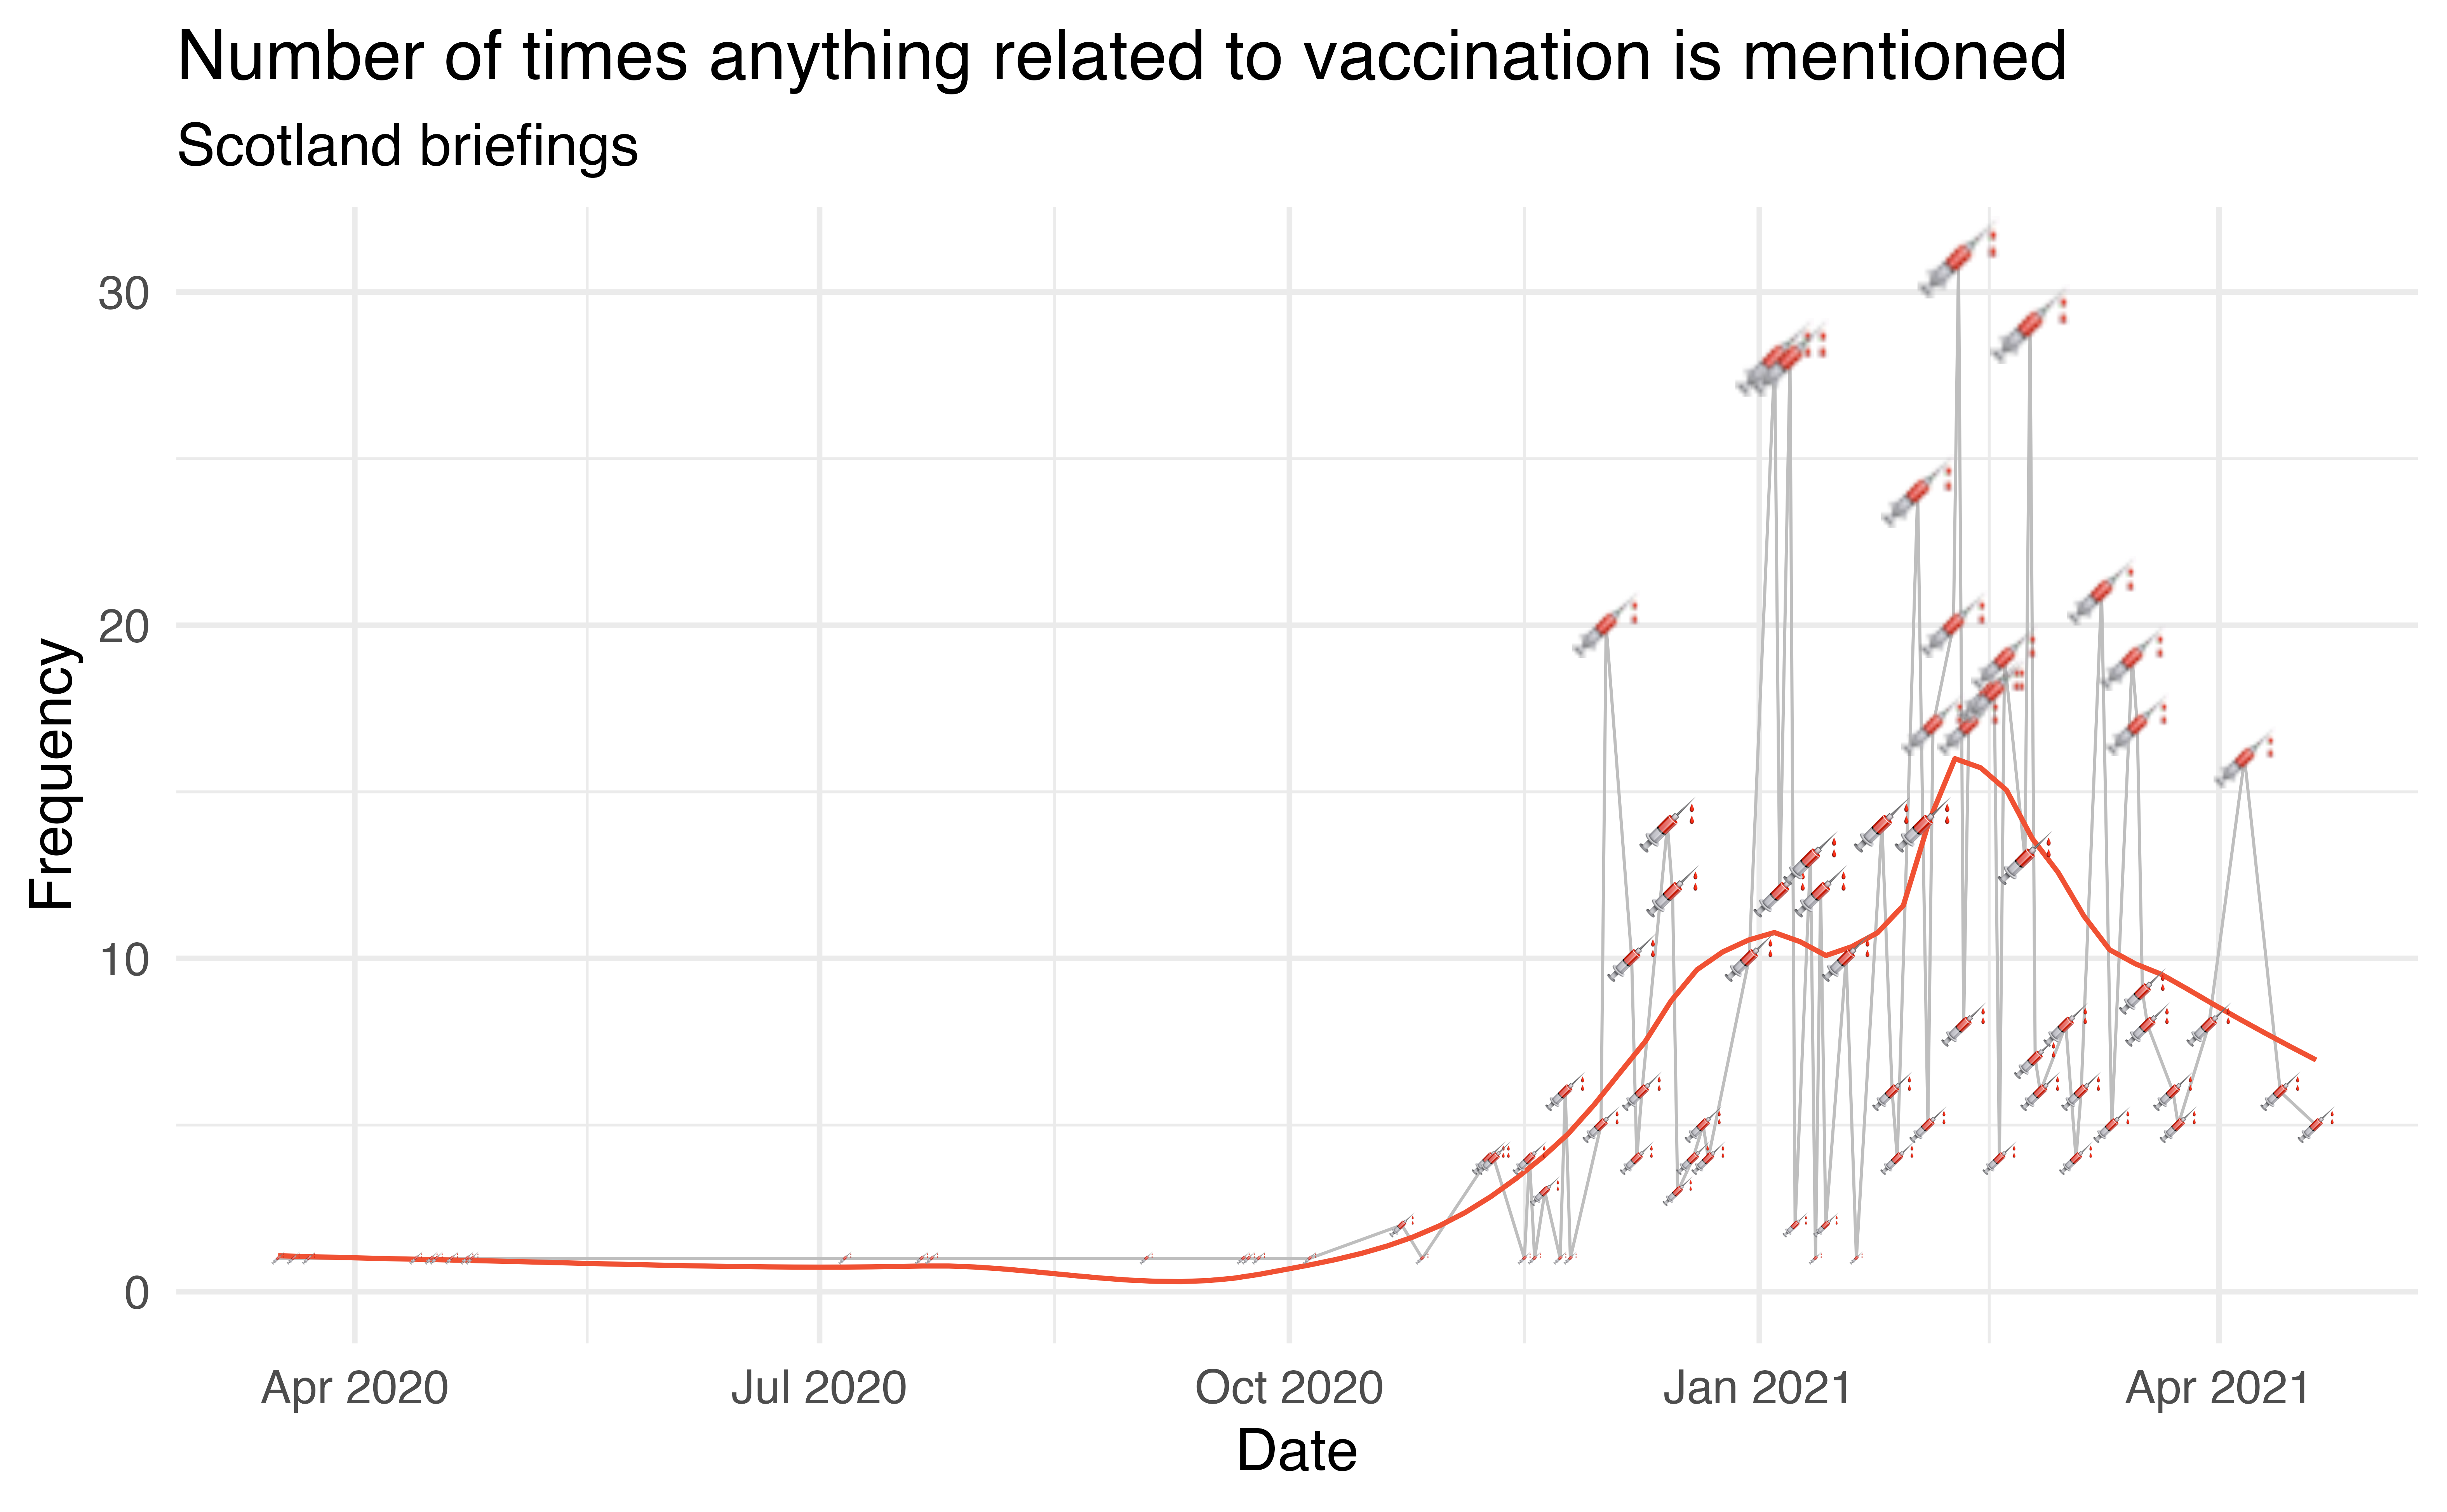 The number of times vaccinations or anything related to them has been mentioned has increased drastically since January. In some briefings in February and March vaccinations were mentioned over 25 times in a given briefing.